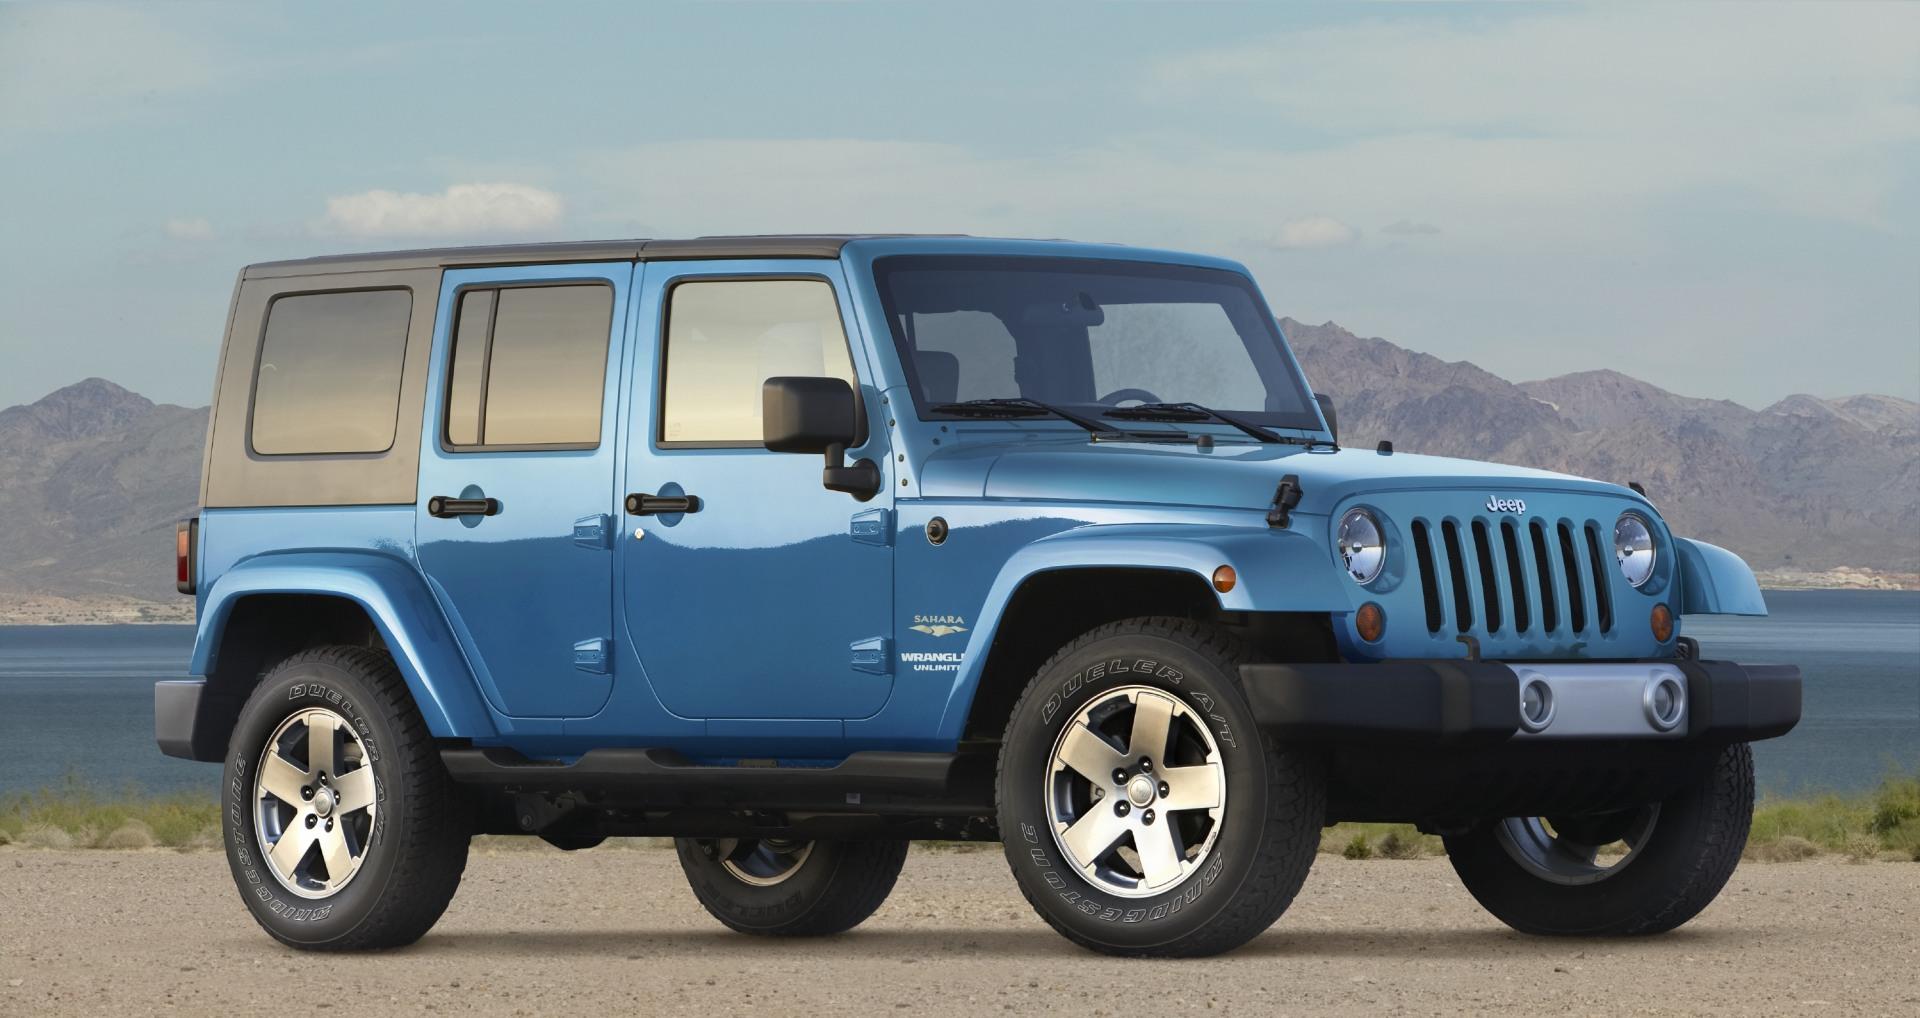 Jeep Wrangler Unlimited News and Information - .com